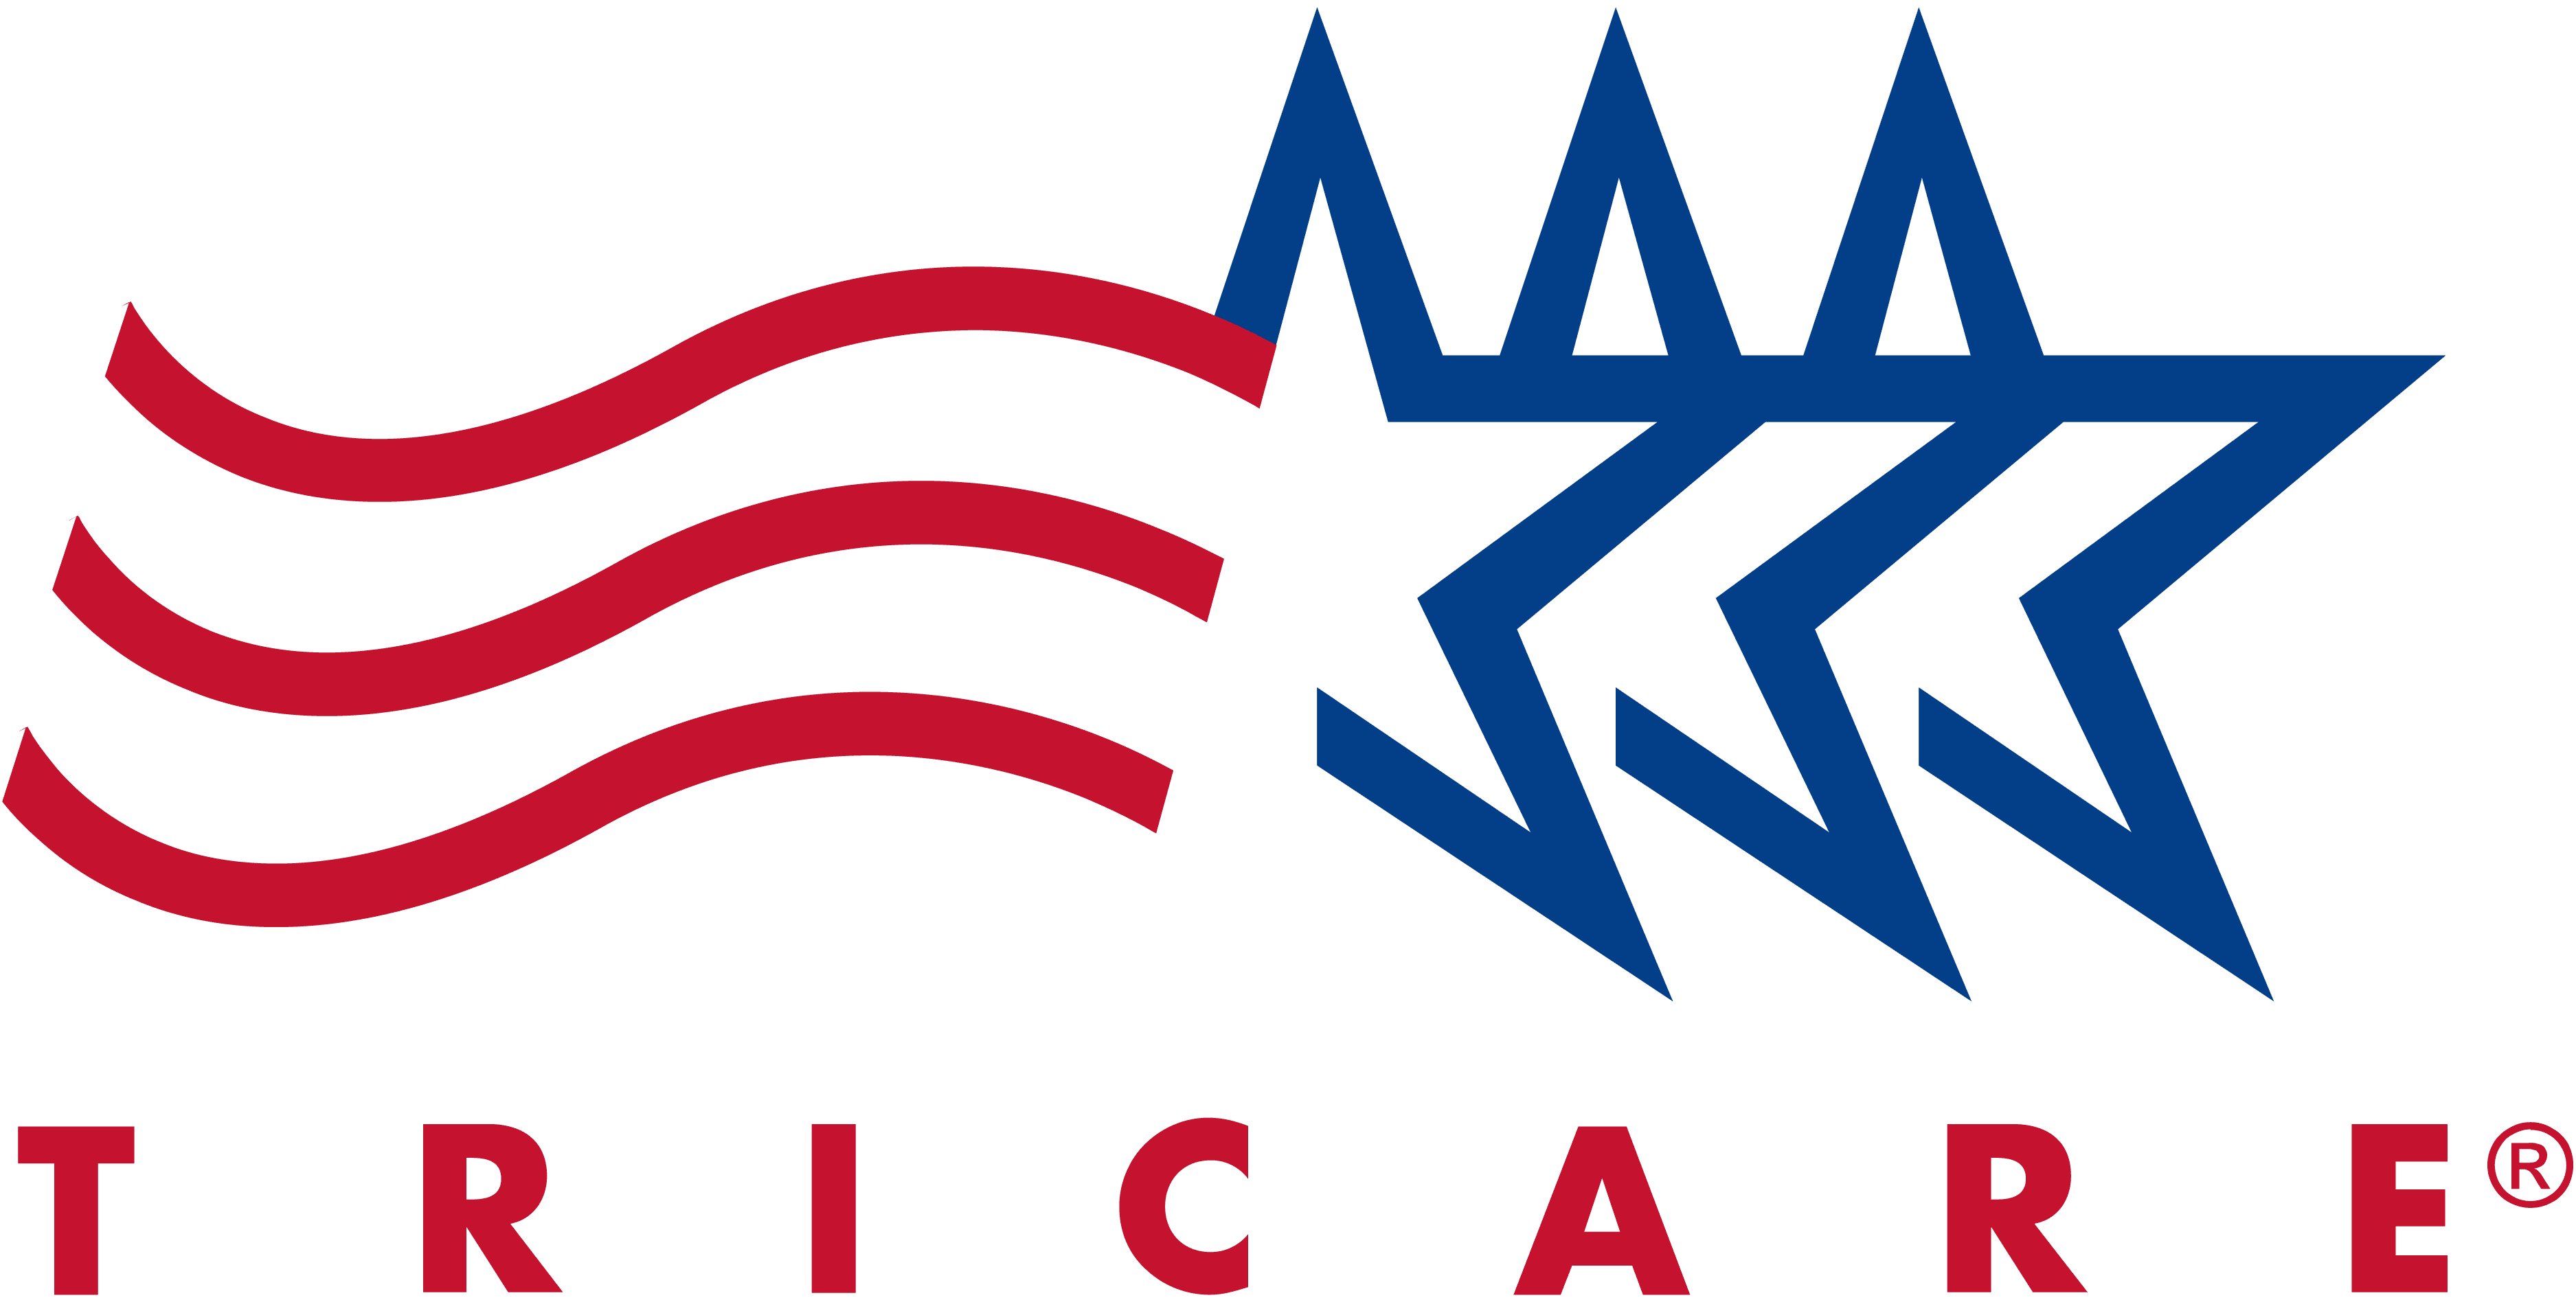 Emergency Prescription Refills Available to TRICARE Beneficiaries in 4